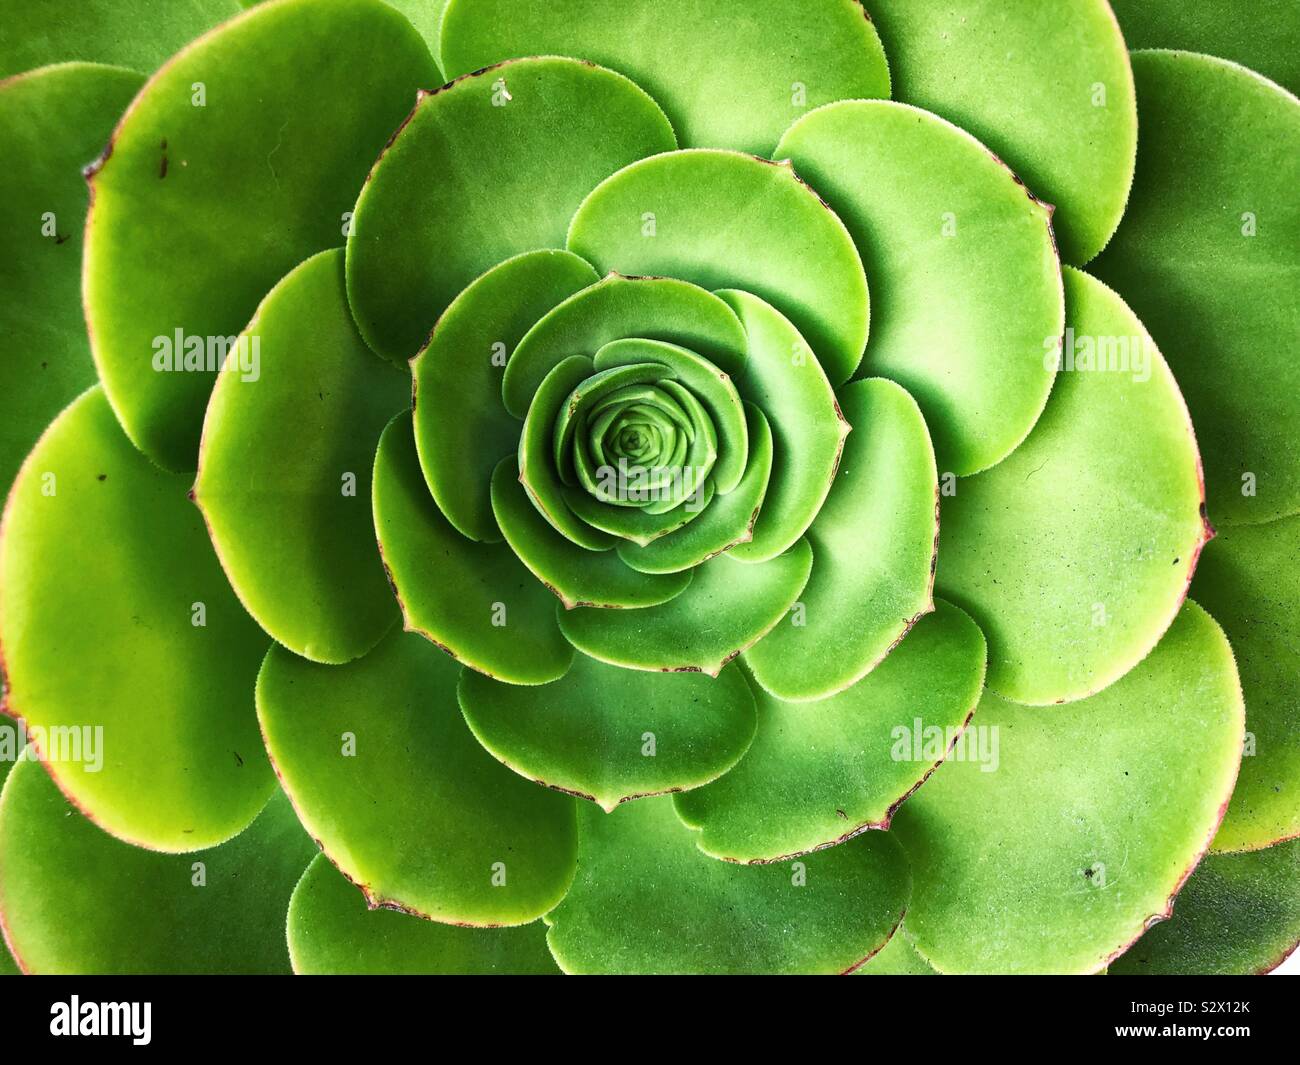 Looking into the eye of succulent plant Stock Photo